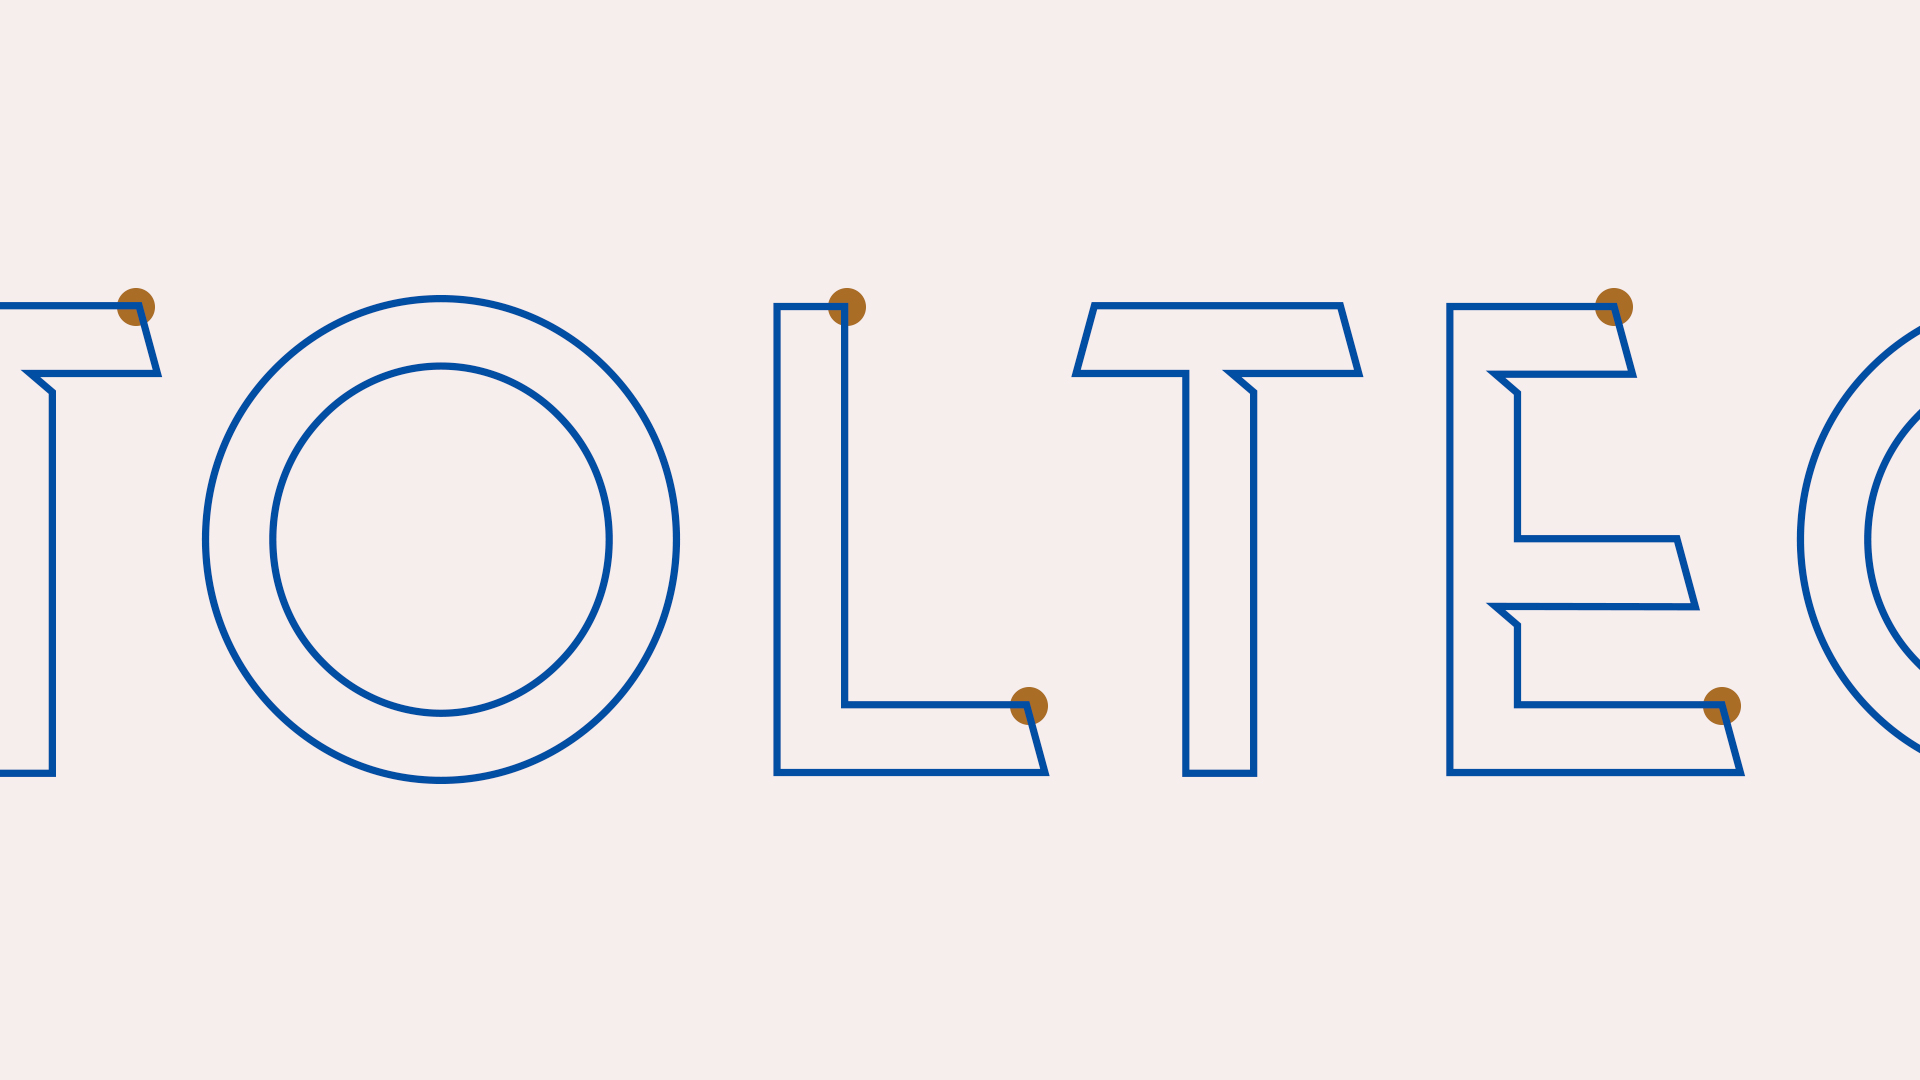 Toltec Logotype By Johnny Q For Hype Group On Dribbble